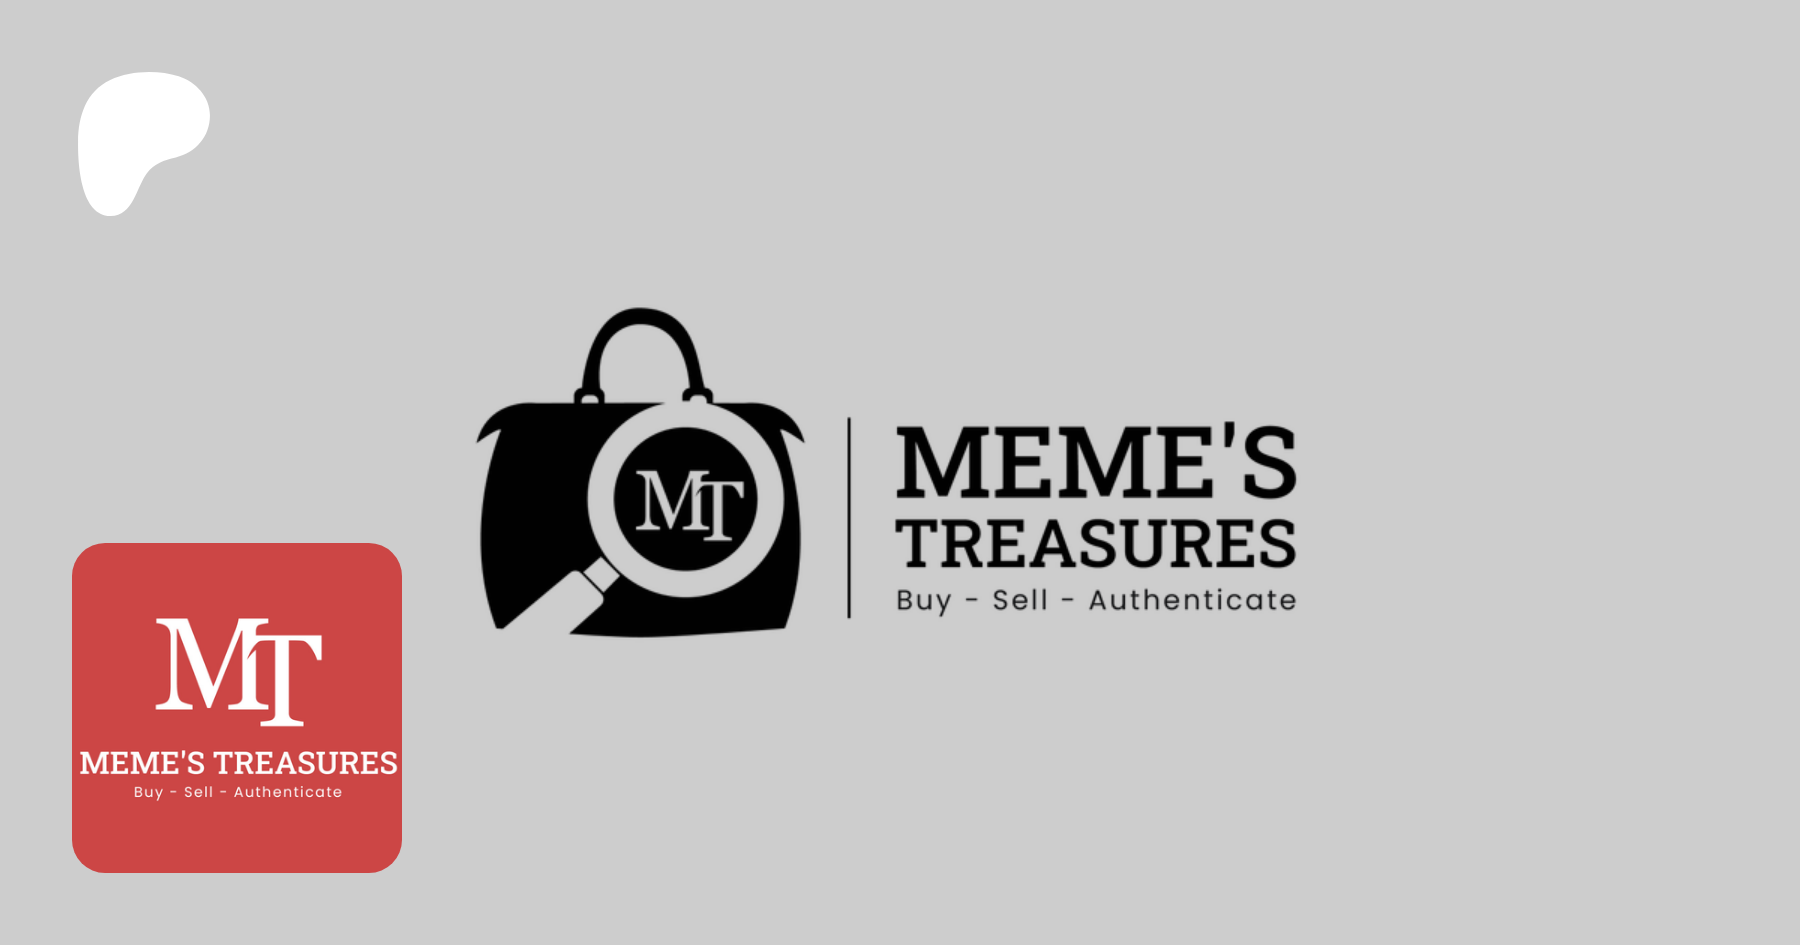 Just - Memes Treasures Sales and Authentication Service